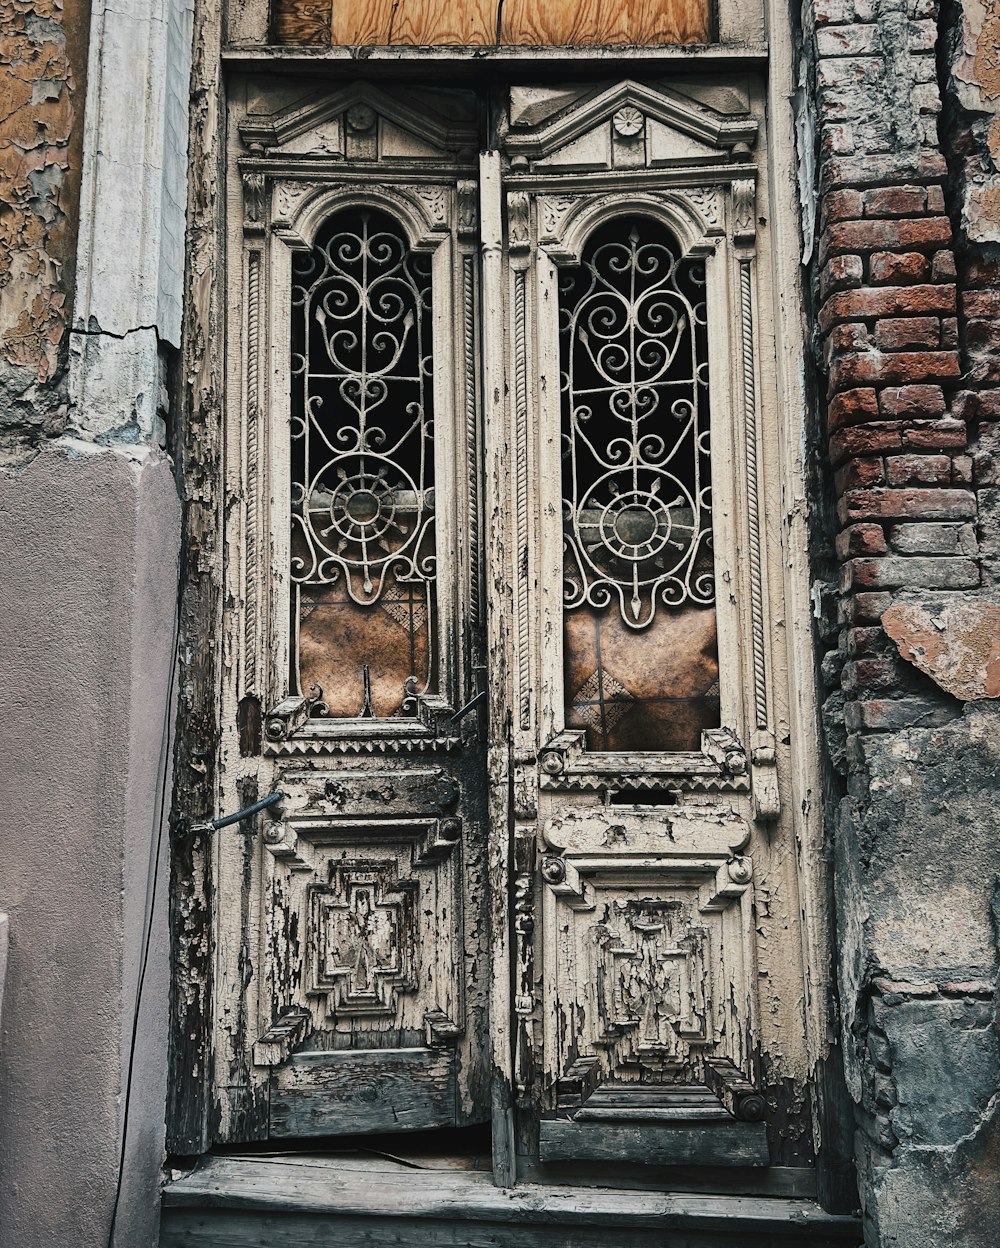 an old door with a cat sitting in the window